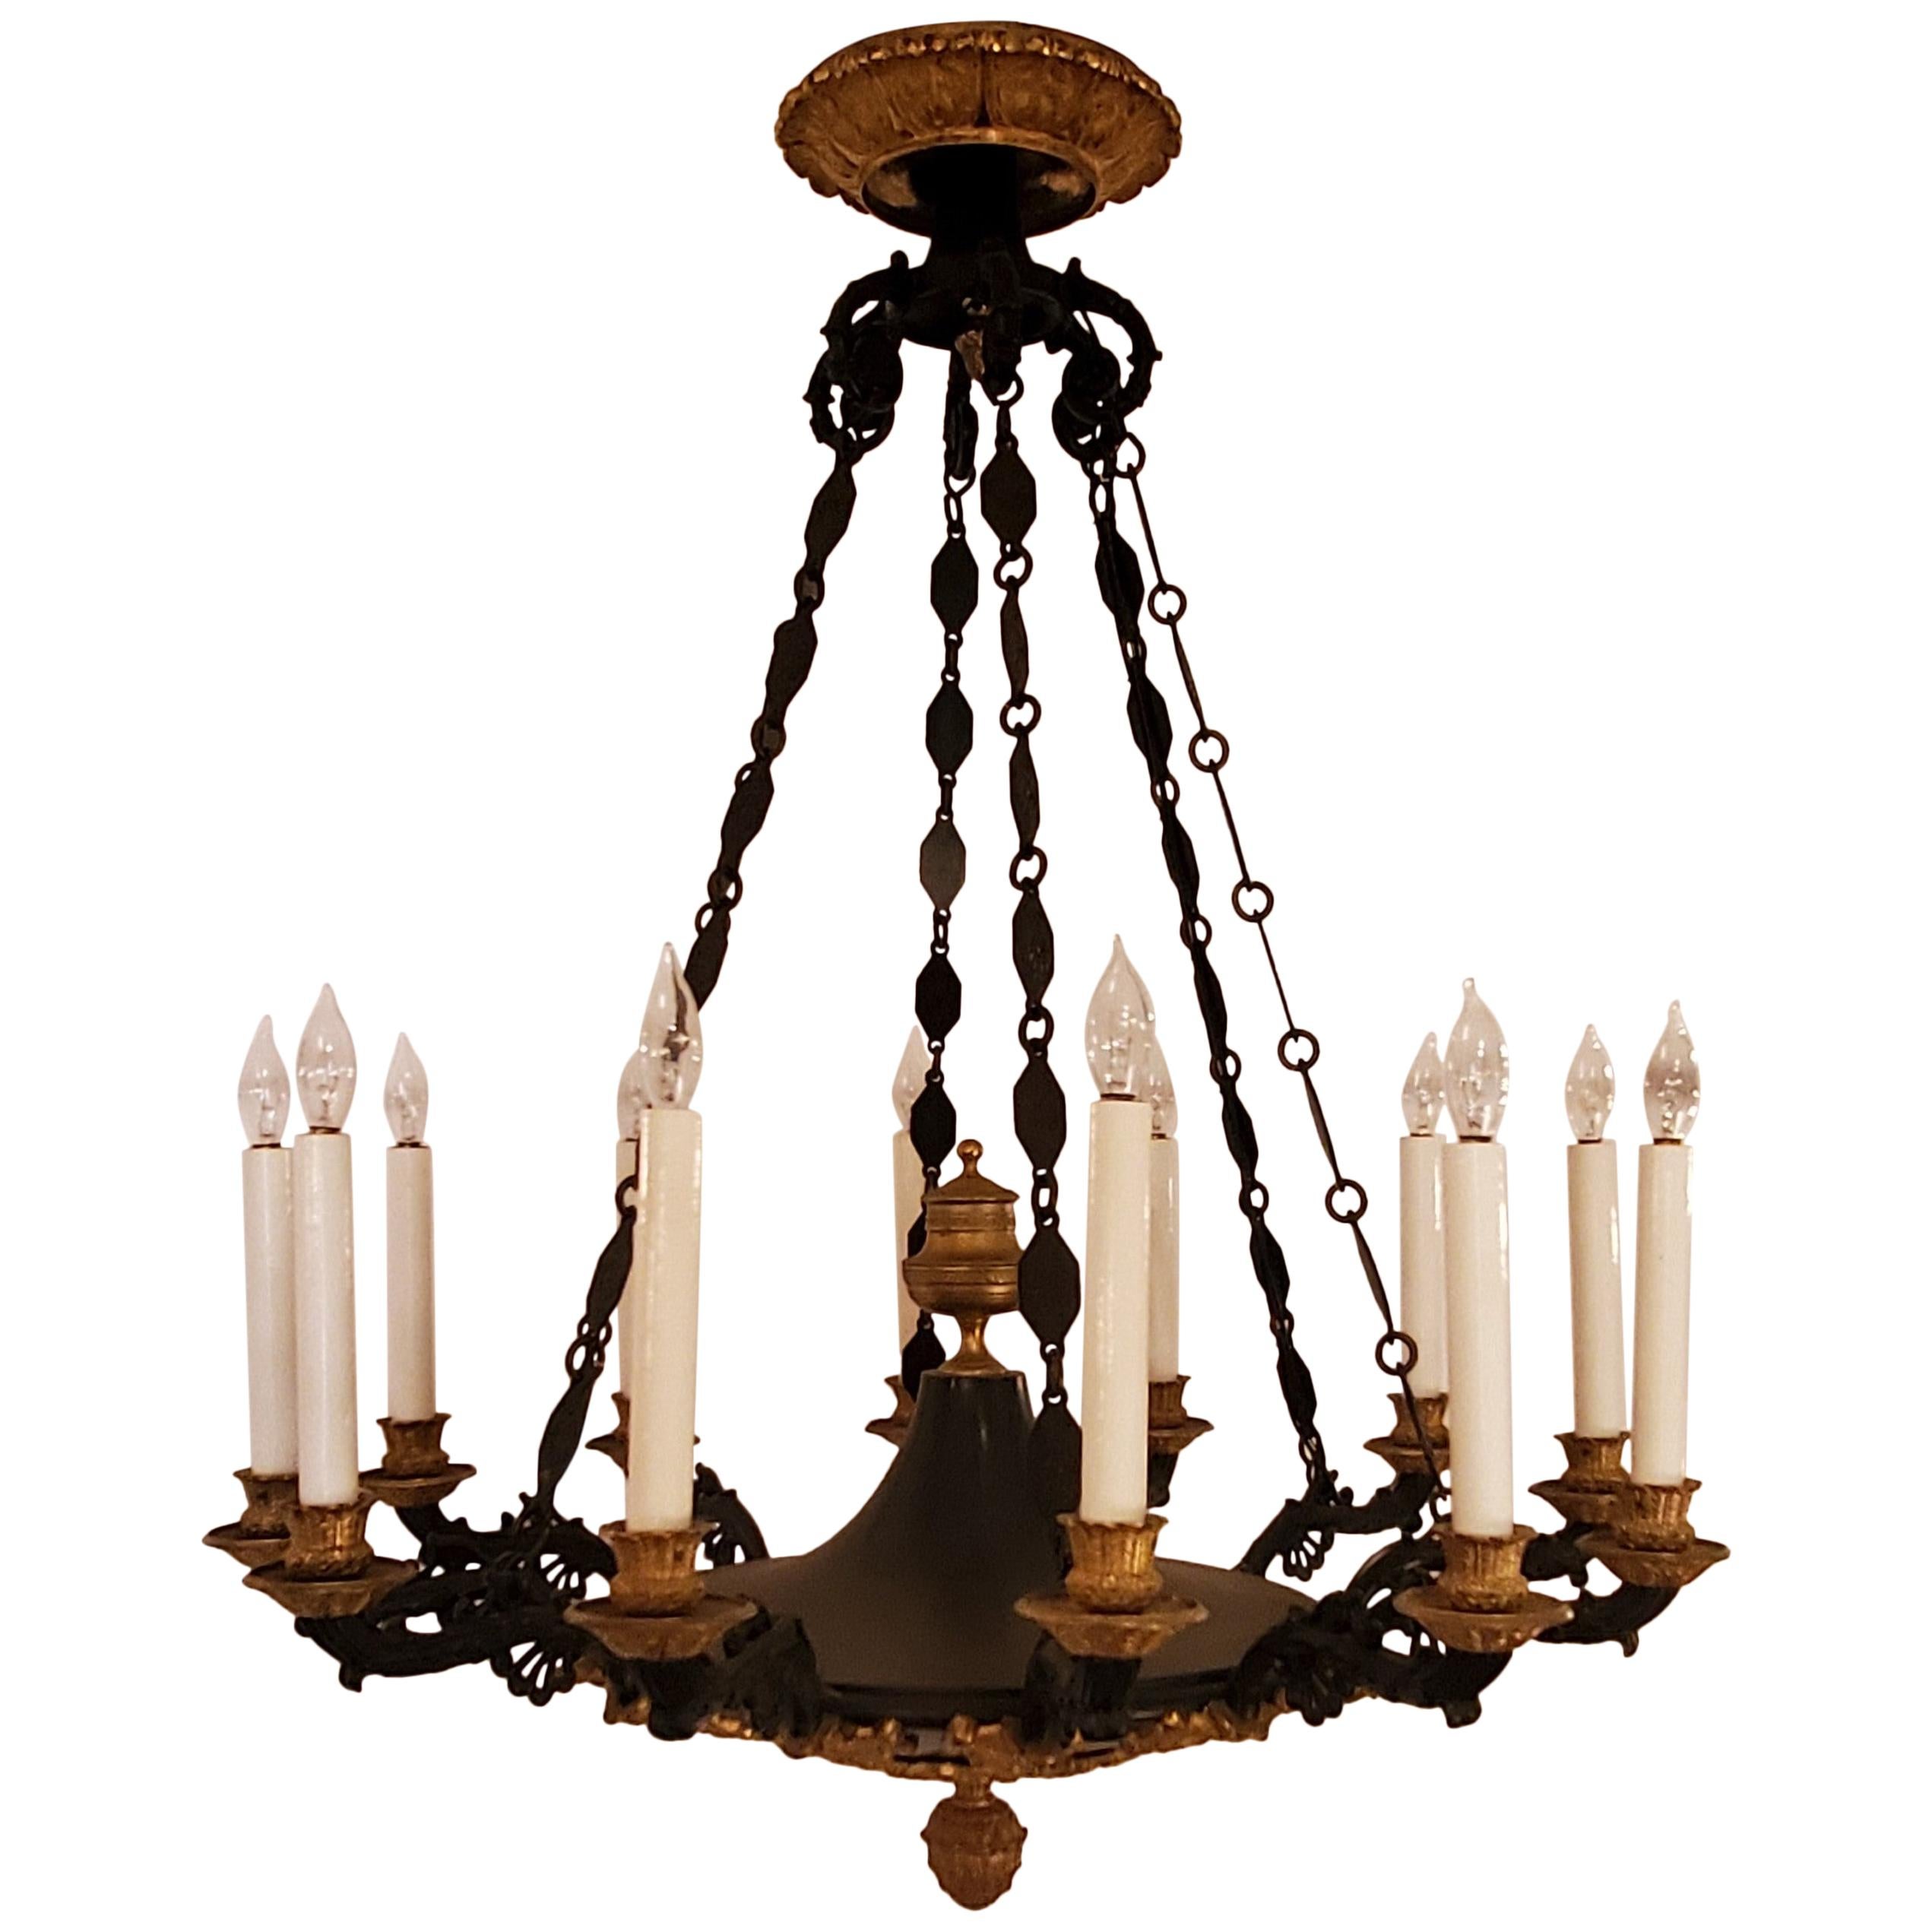 Antique French Empire Ormolu and Patinated Bronze Chandelier